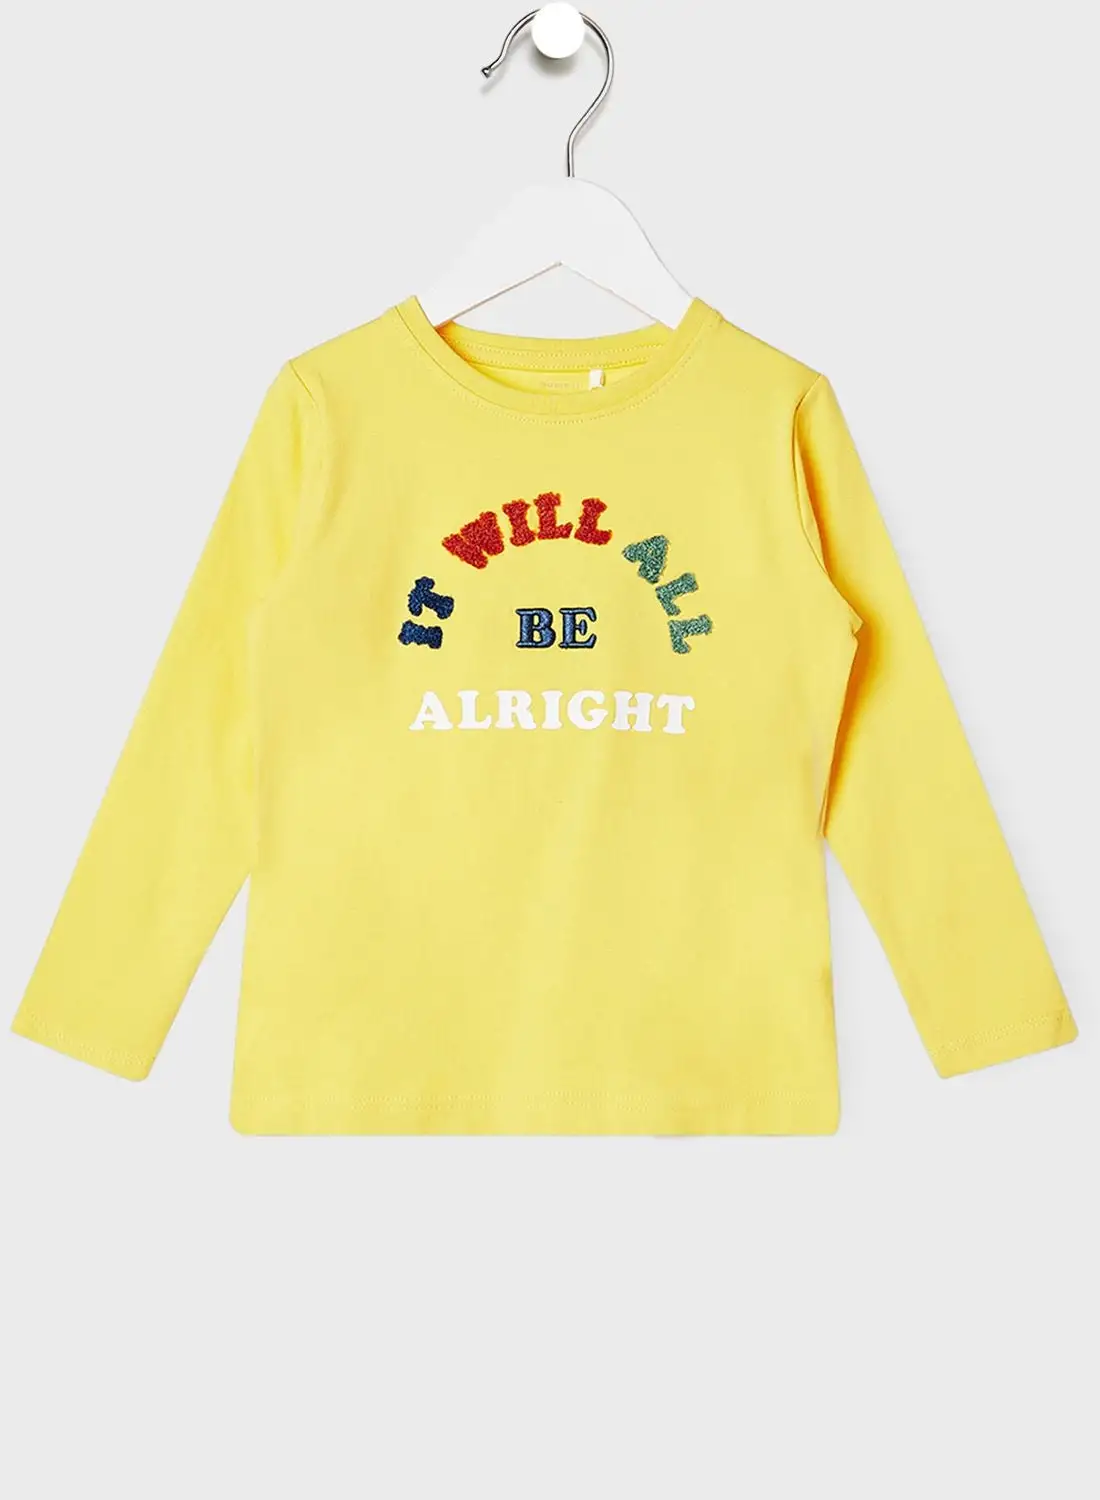 NAME IT Kids Embroidered Text T-Shirt